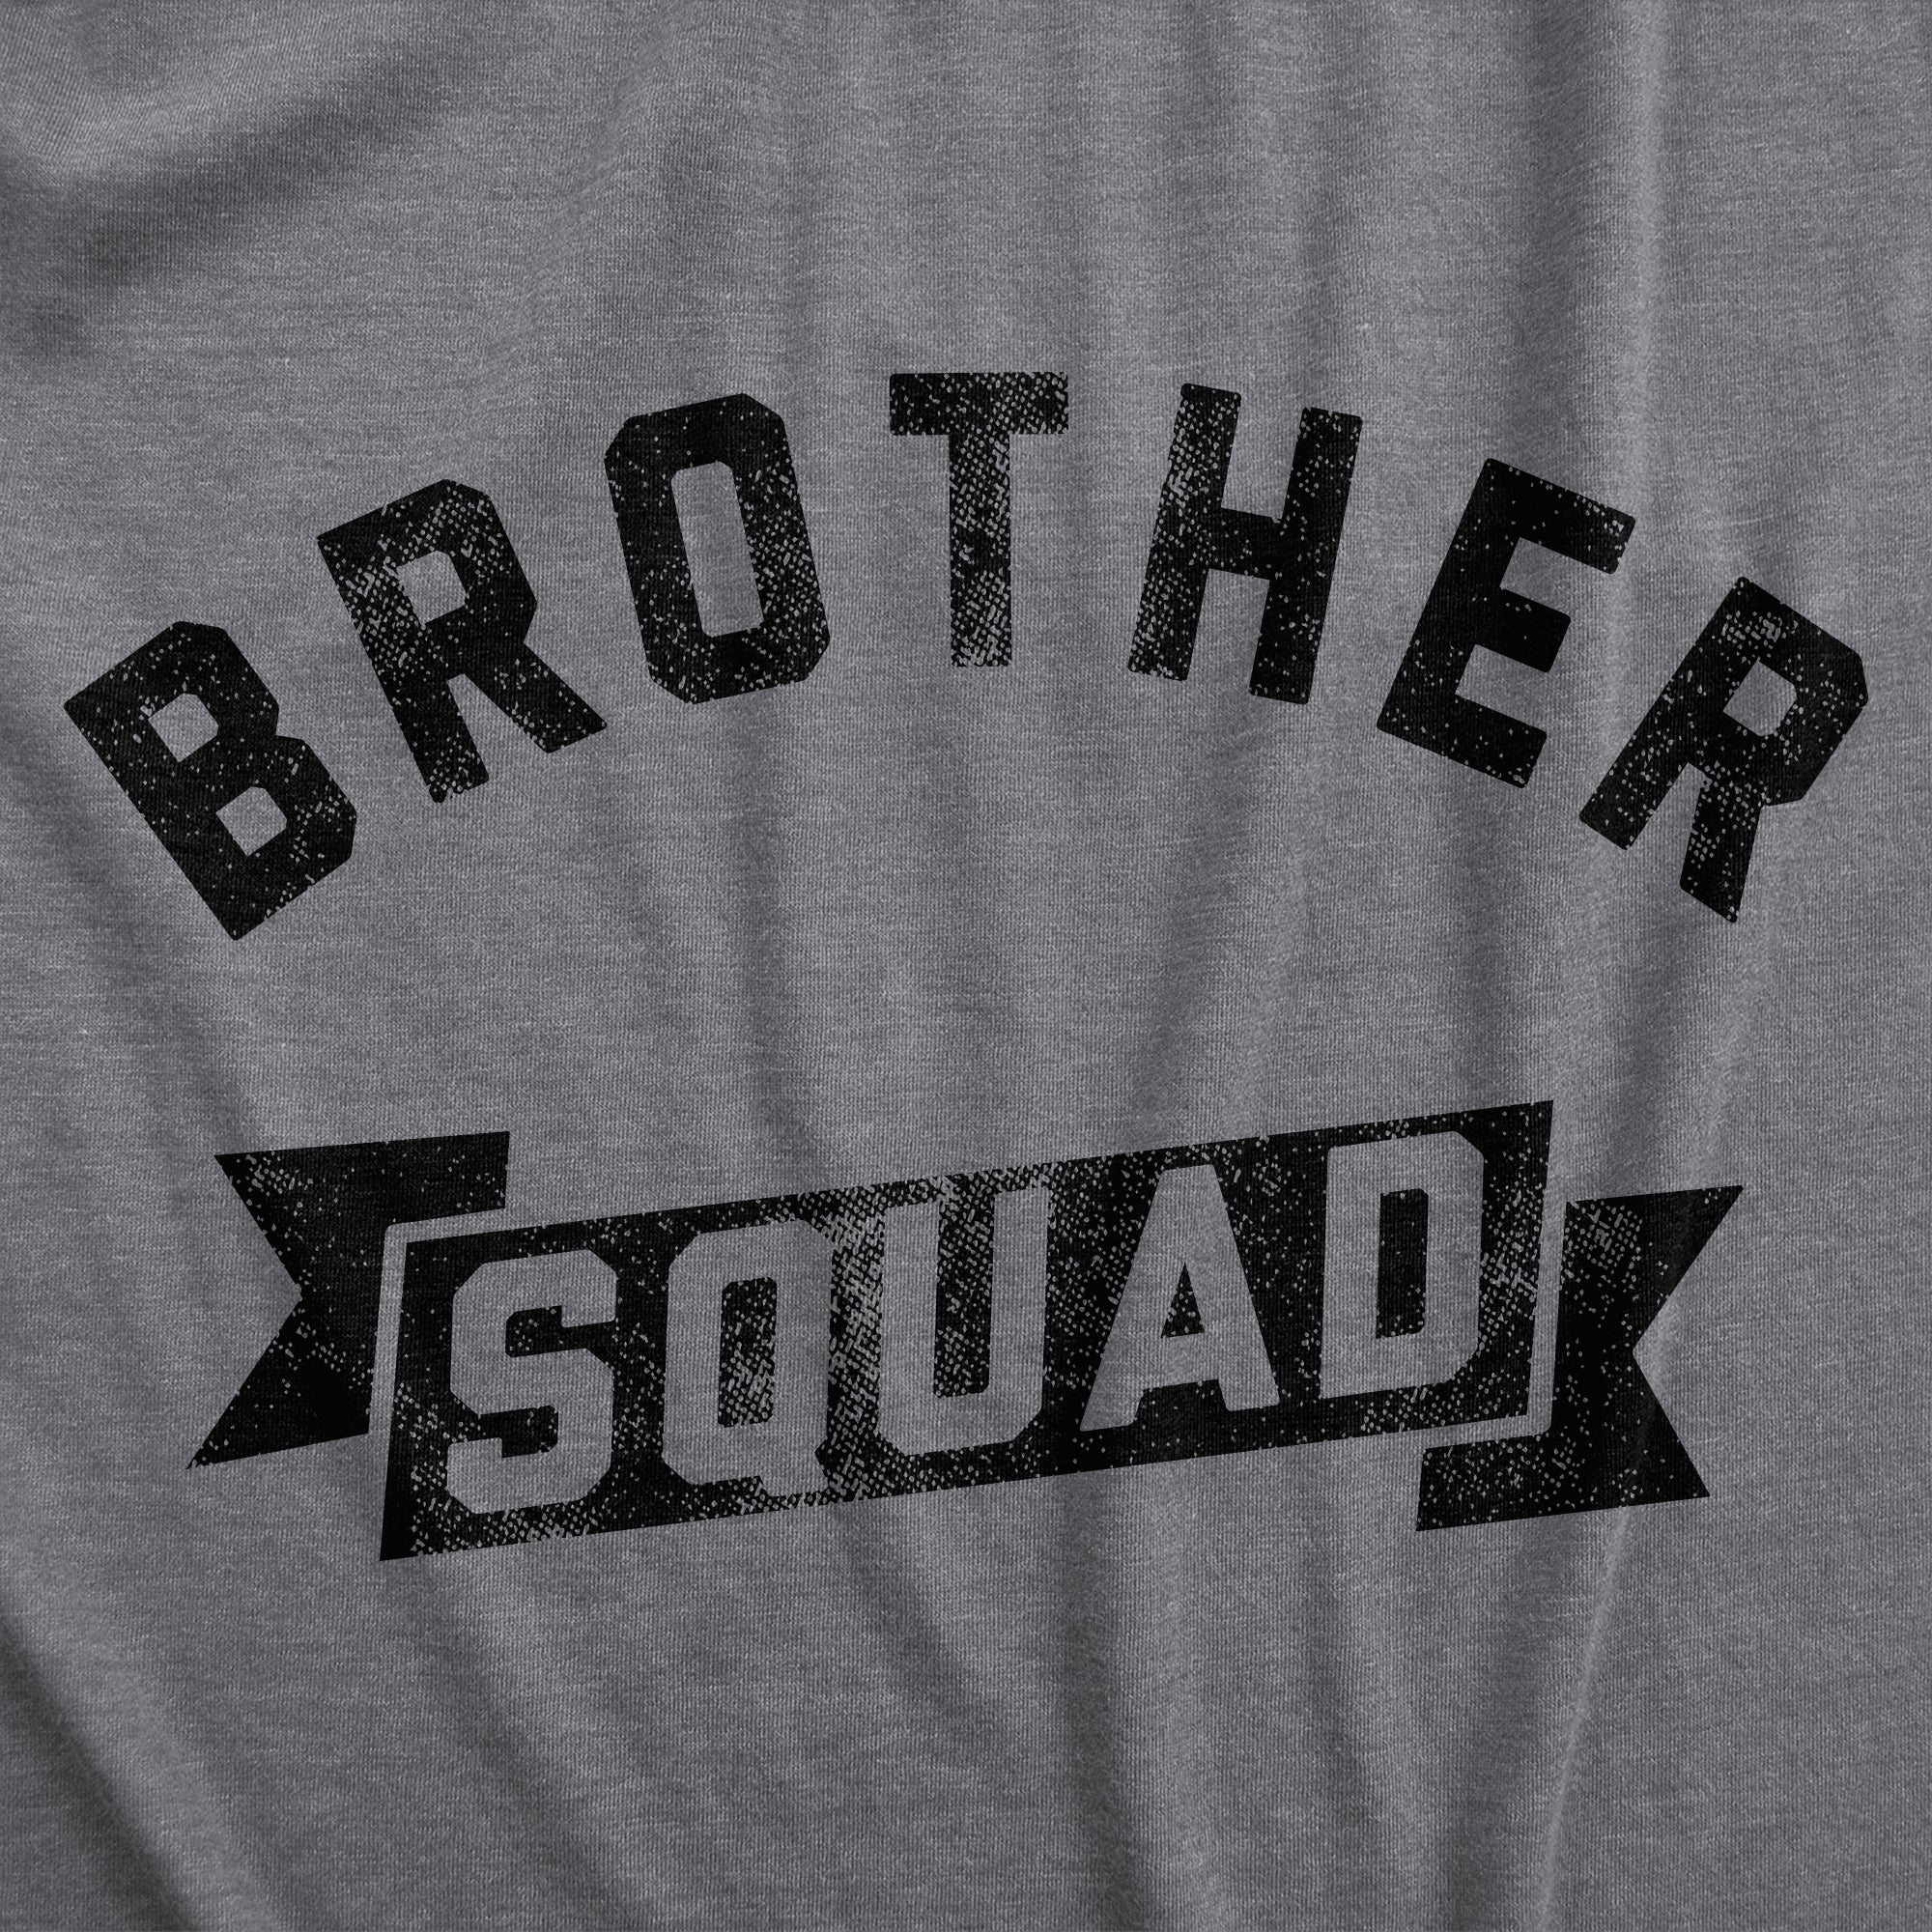 Funny Dark Heather Grey - Brother Squad Brother Squad Onesie Nerdy Brother Tee